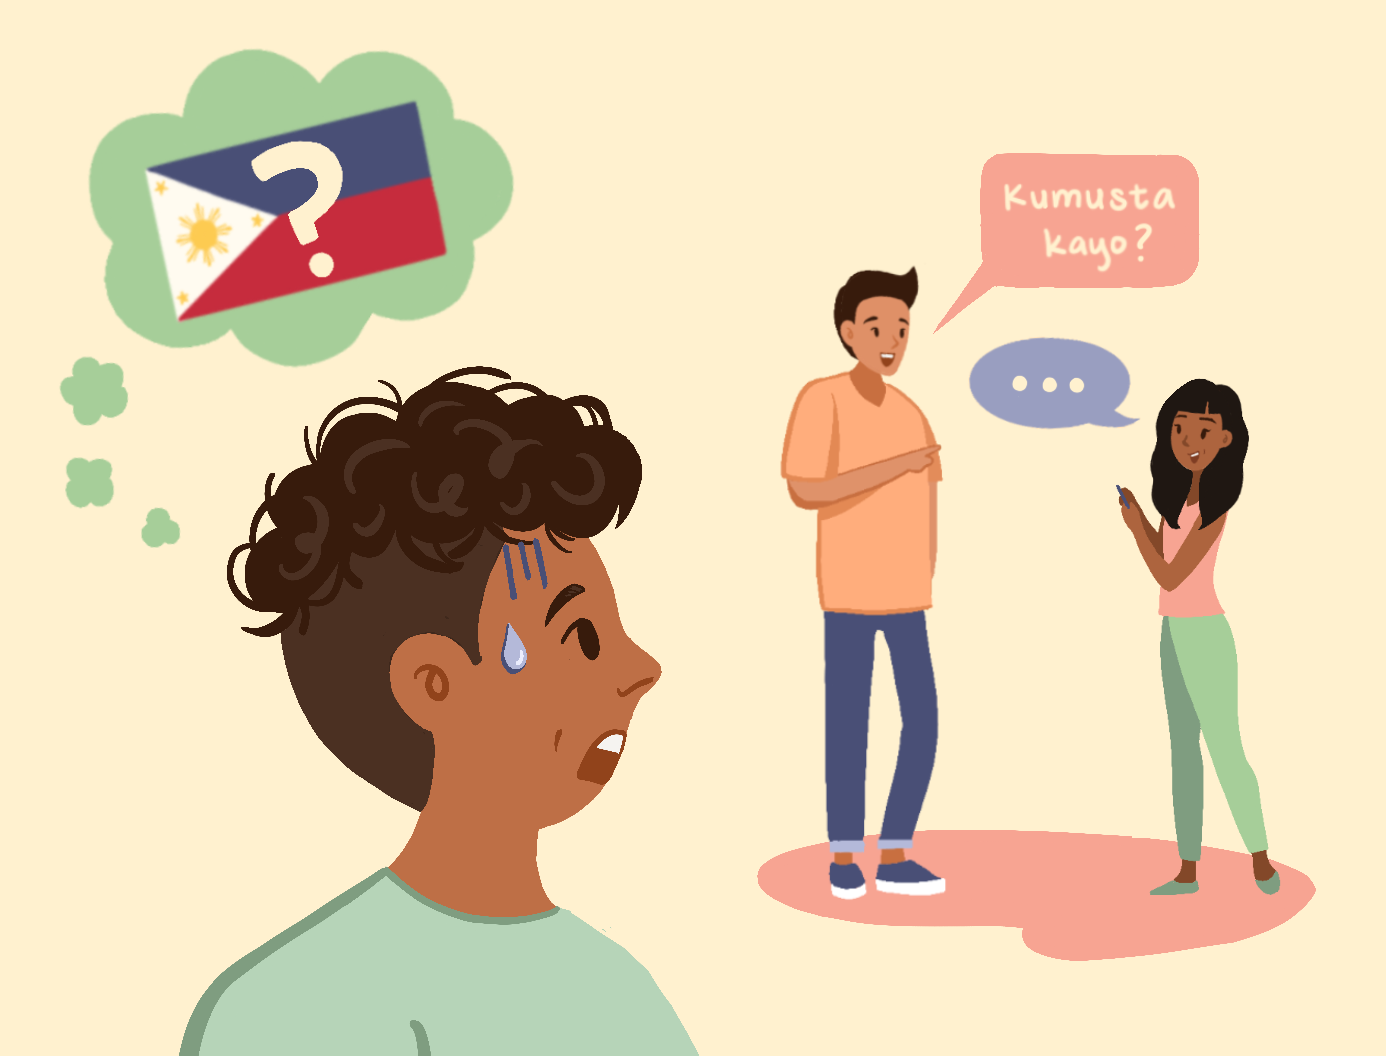 Why I Can't Speak Filipino Even After 9 Years in the Philippines